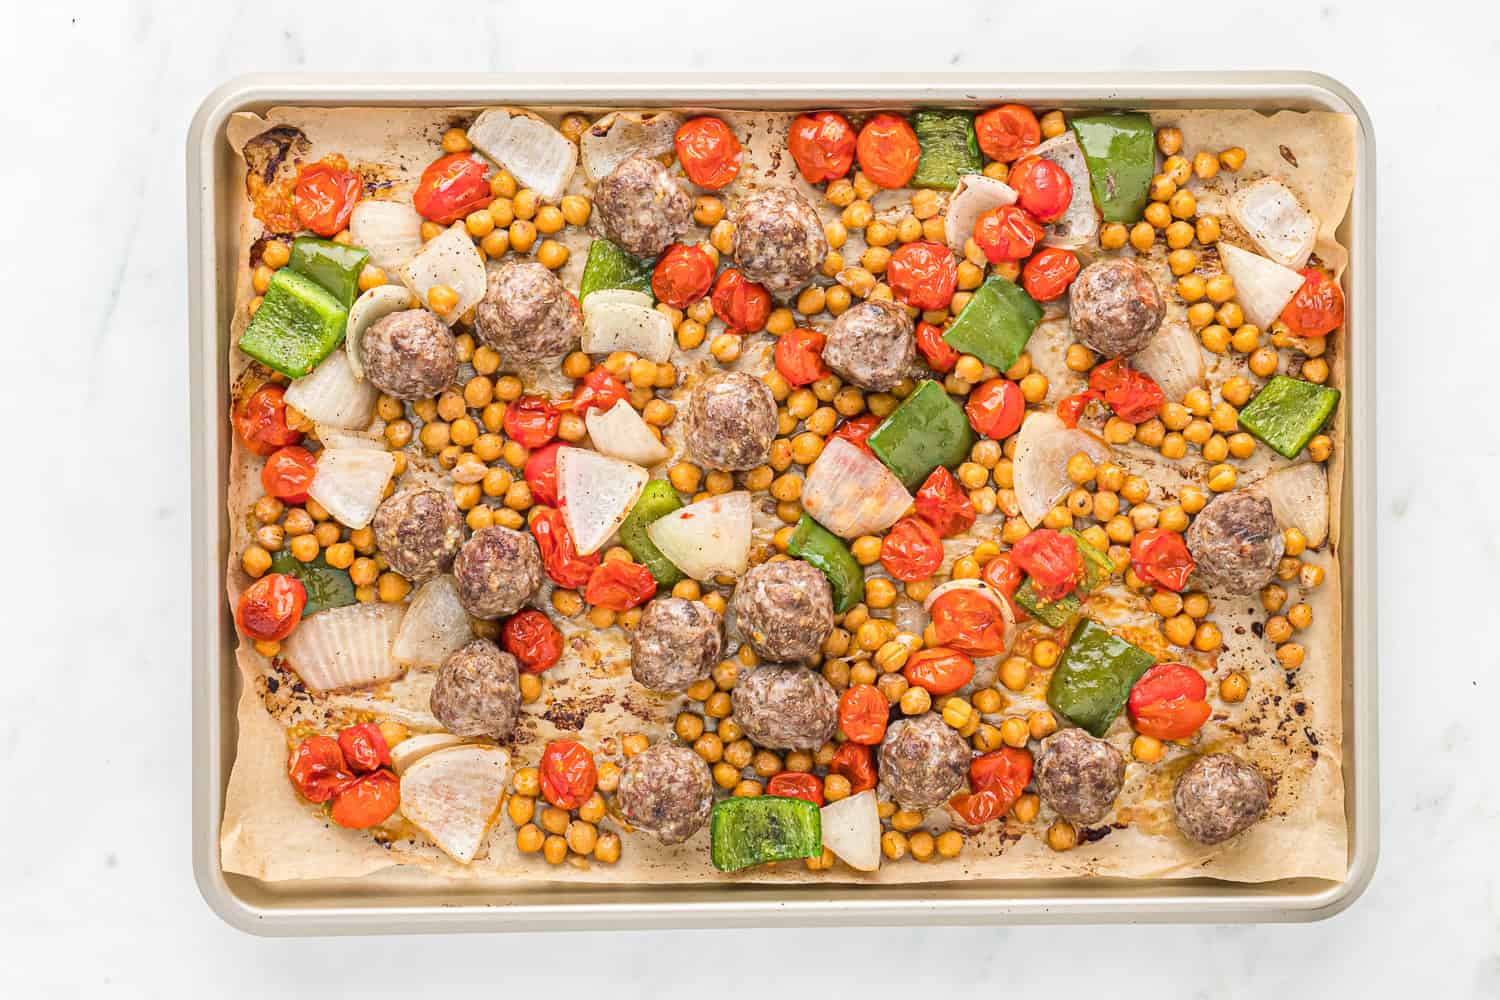 Cooked meatballs and vegetables on a sheet pan.